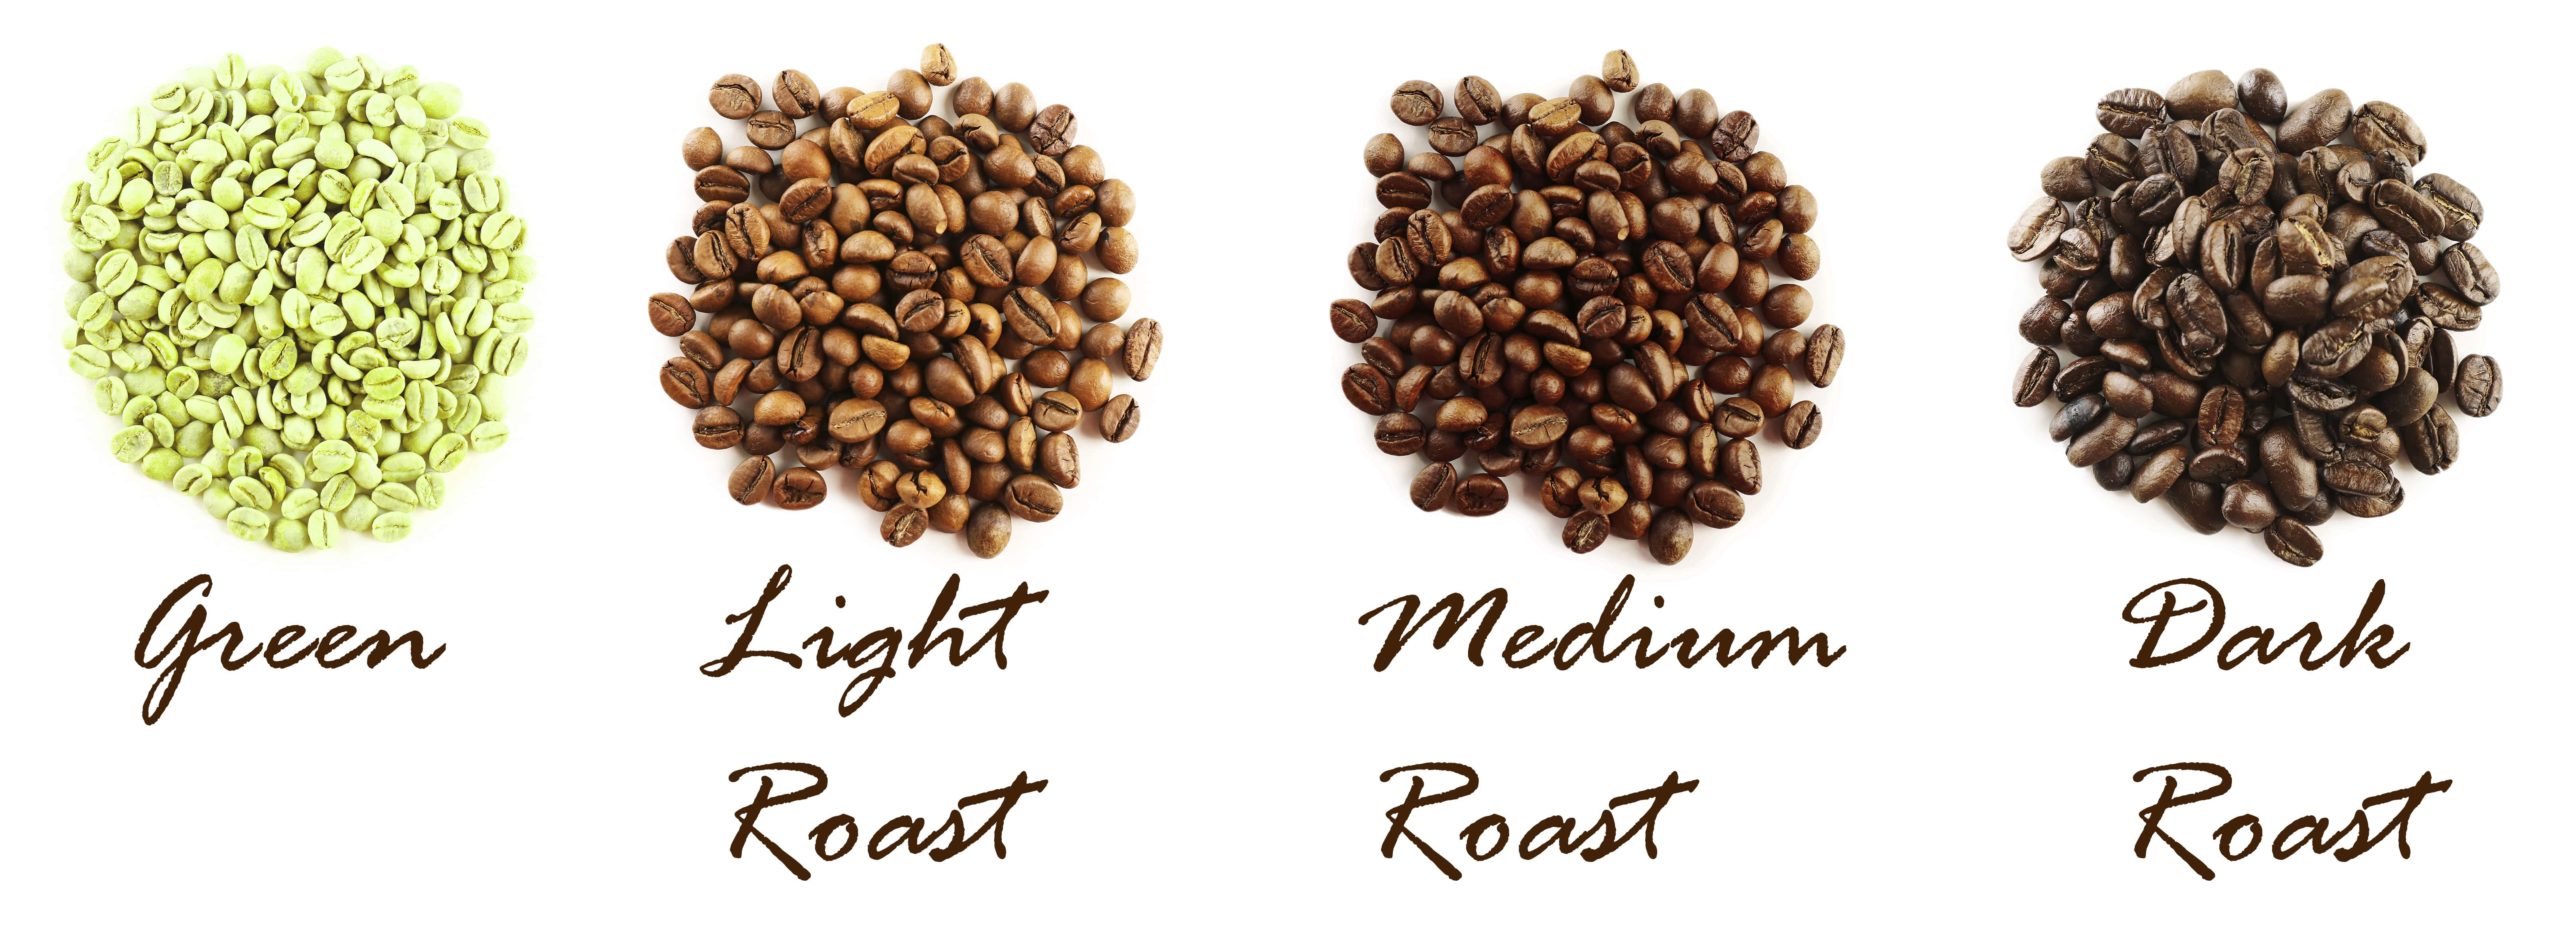 Coffee roasts explained from light to dark.